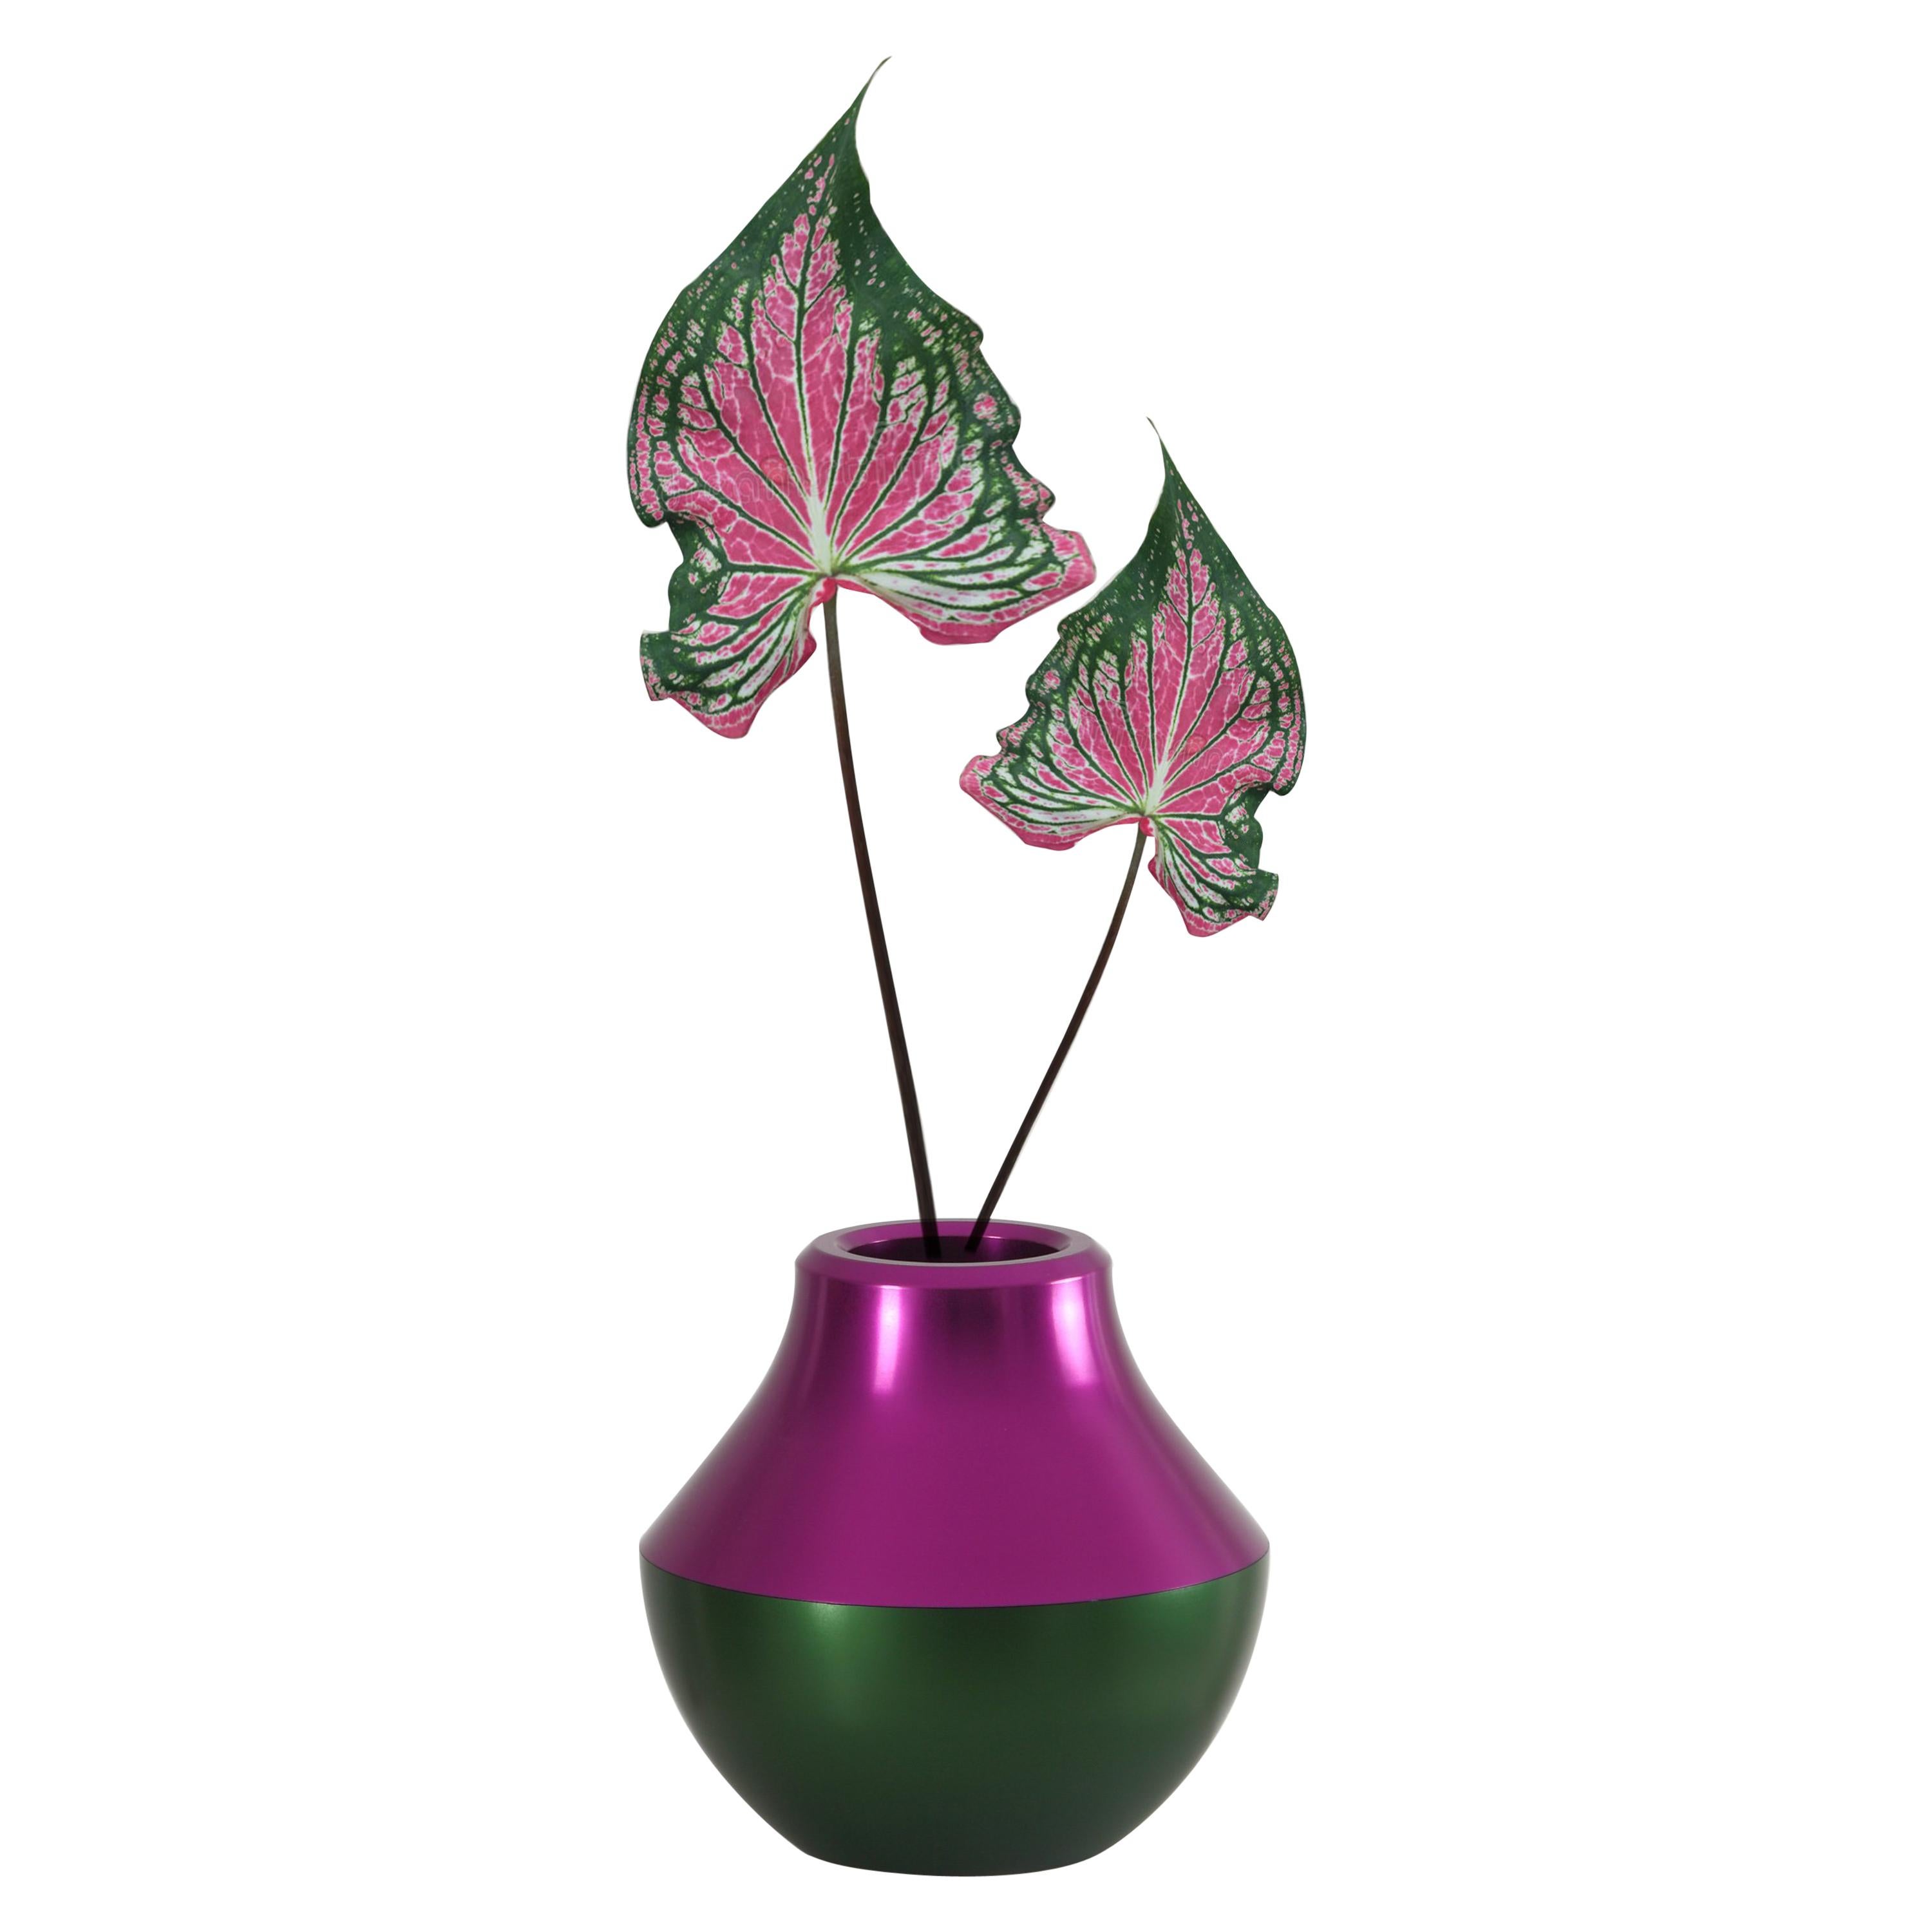 Mykonos Colorful Vase Centrepiece by May Arratia, Customizable Colors For Sale